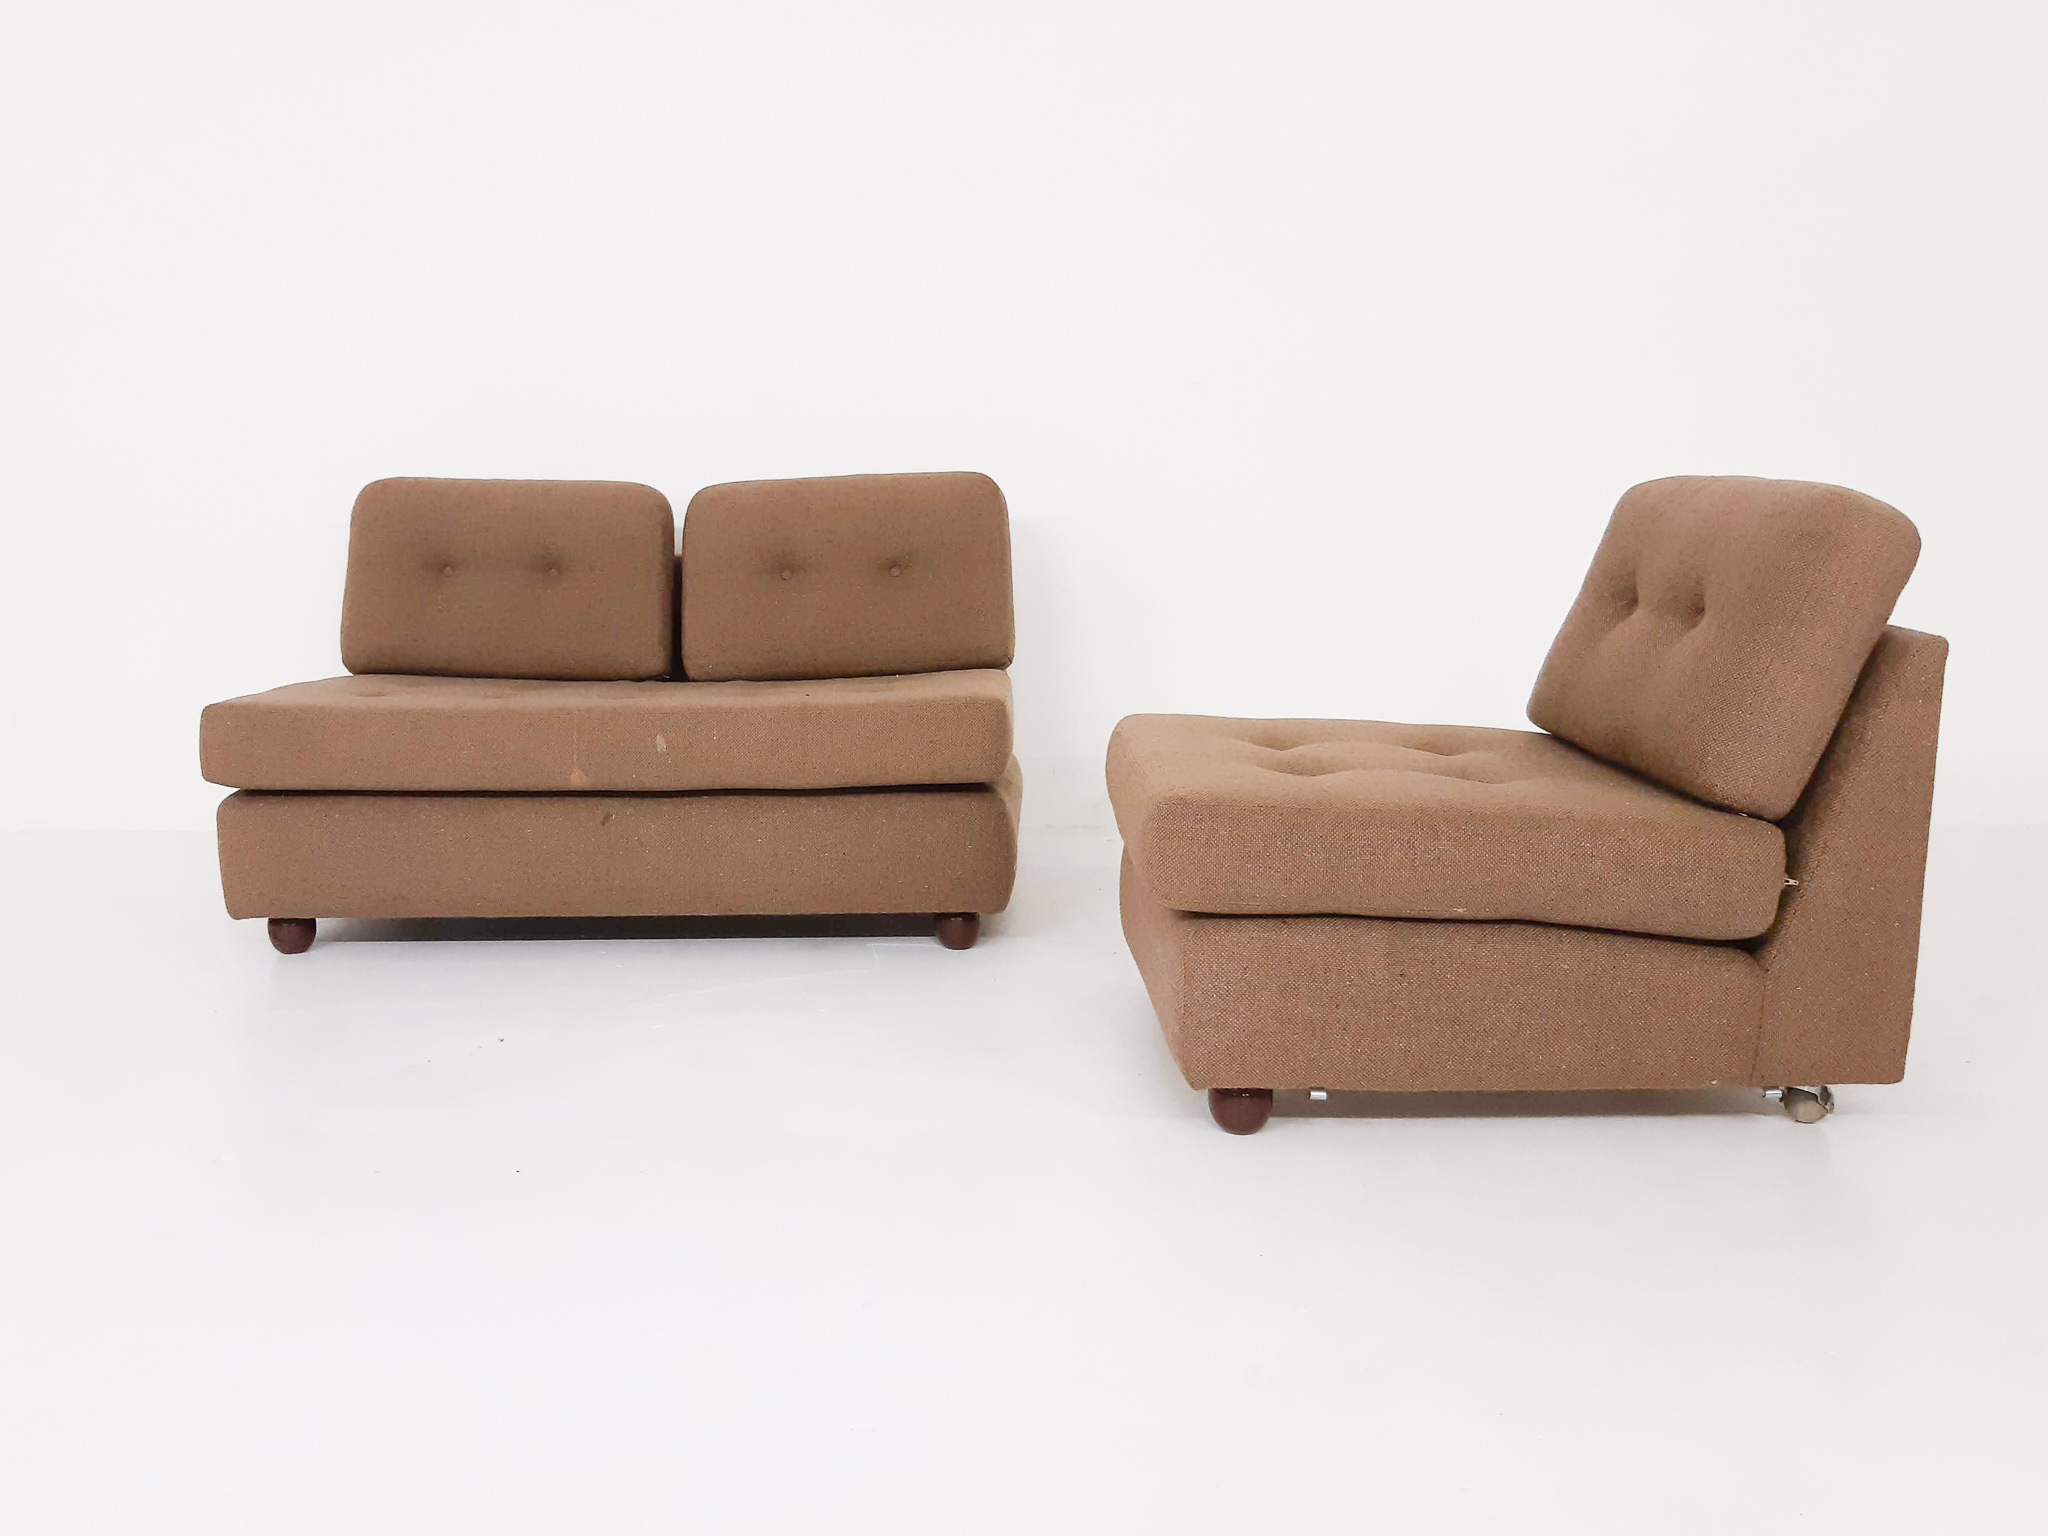 Sofas | Buy Vintage Zo Oud Seating Design Goed Als at